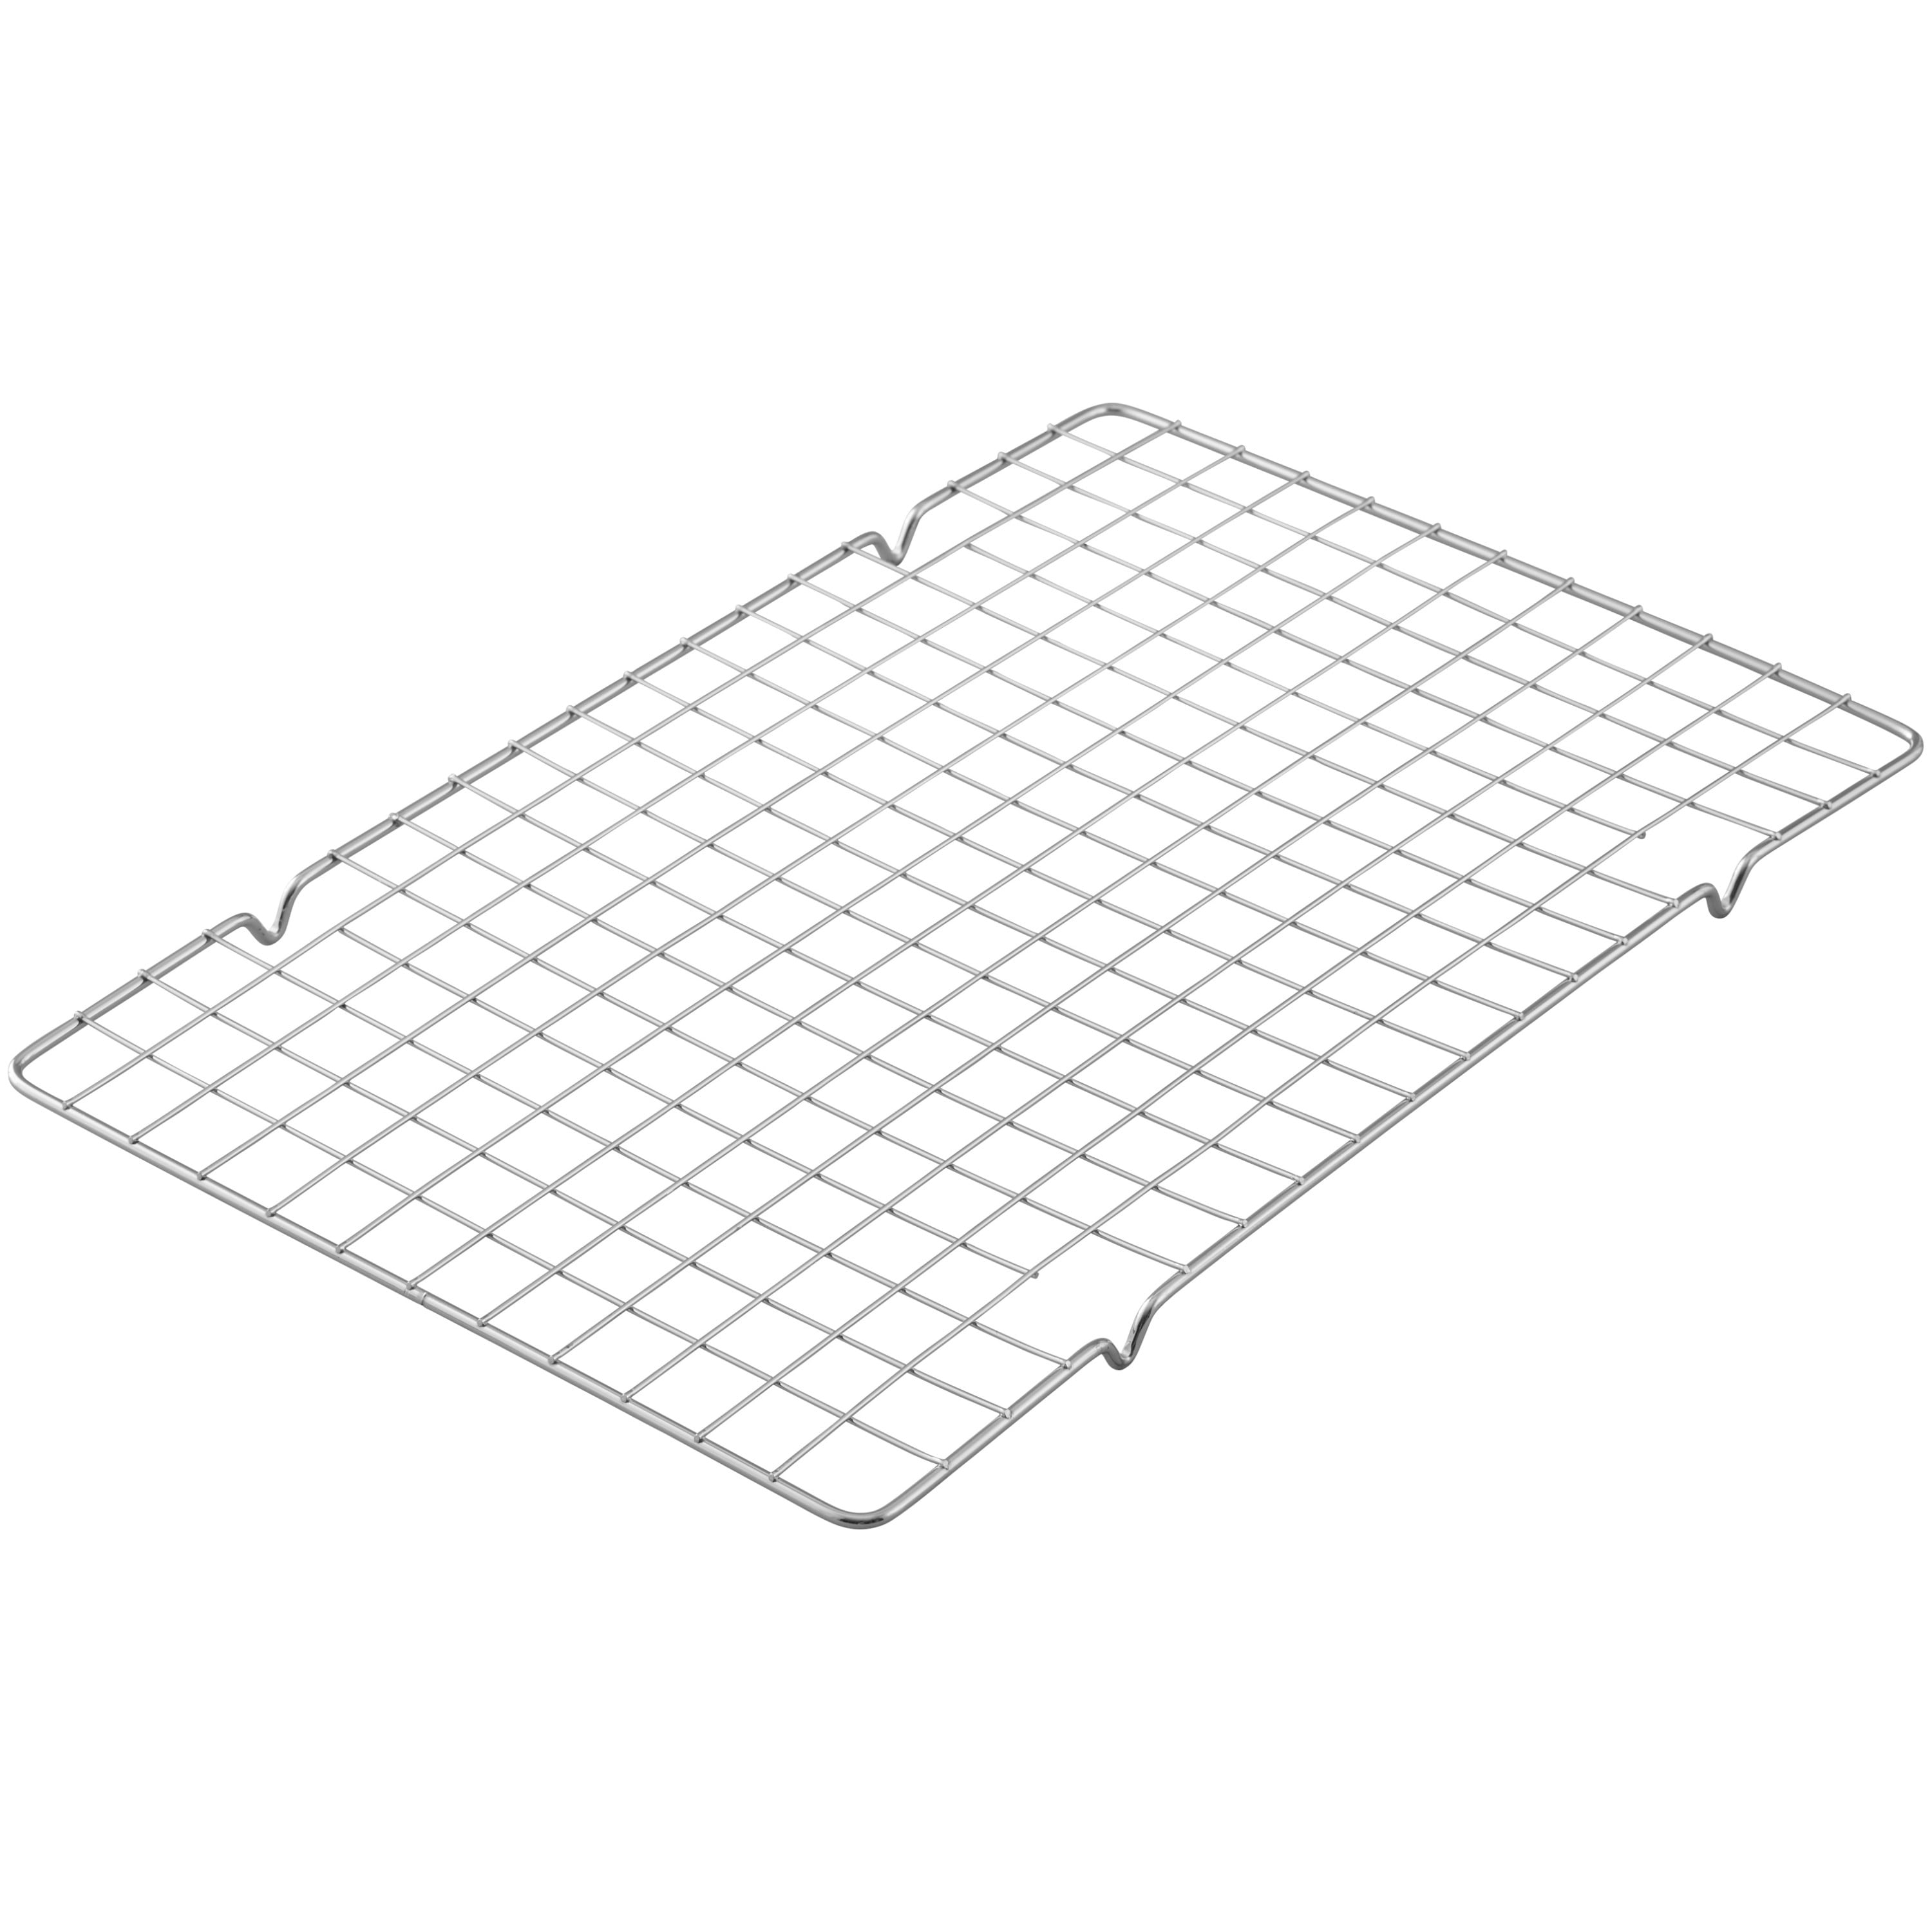 Wilton 10-Inch by 16-Inch Chrome-Plated Cooling Grid 